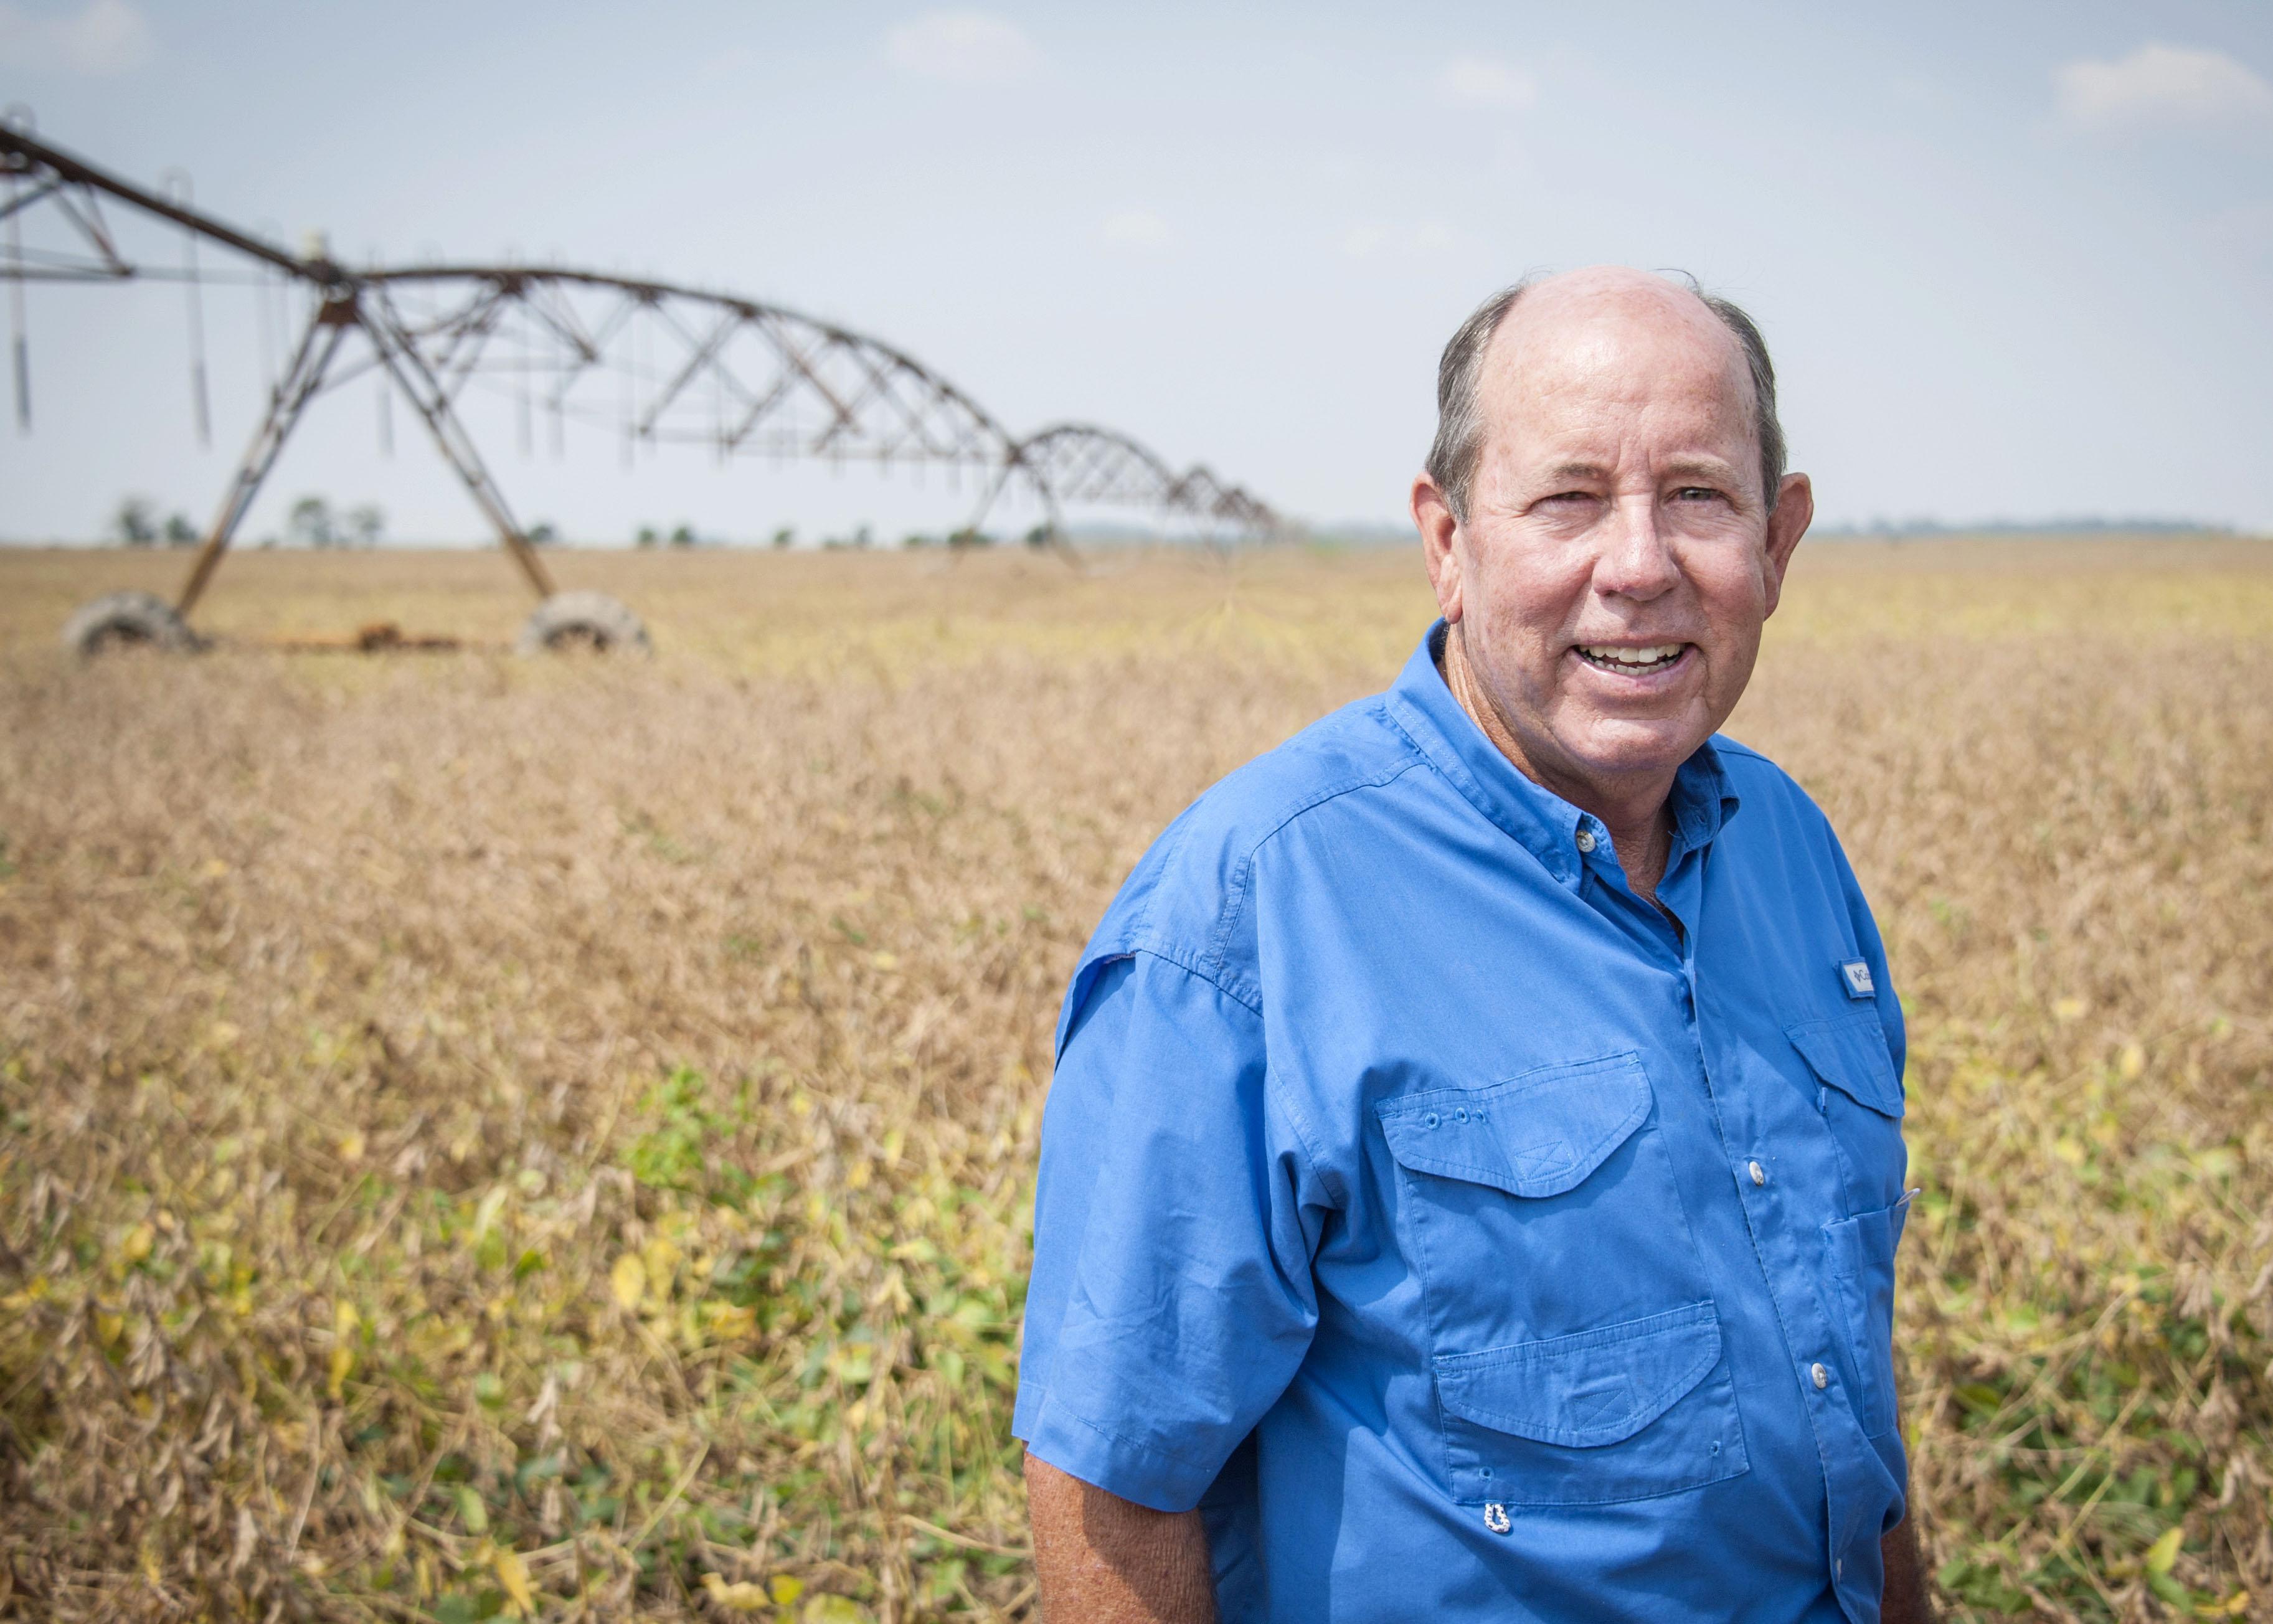 Abbott Myers starts working on his 7,138 acre farm at sunrise each day and often works after sunset. He was named Mississippi's winner of the 2013 Swisher Sweets/Sunbelt Expo Southeastern Farmer of the Year award. (Photo by MSU Ag Communications/Scott Corey)